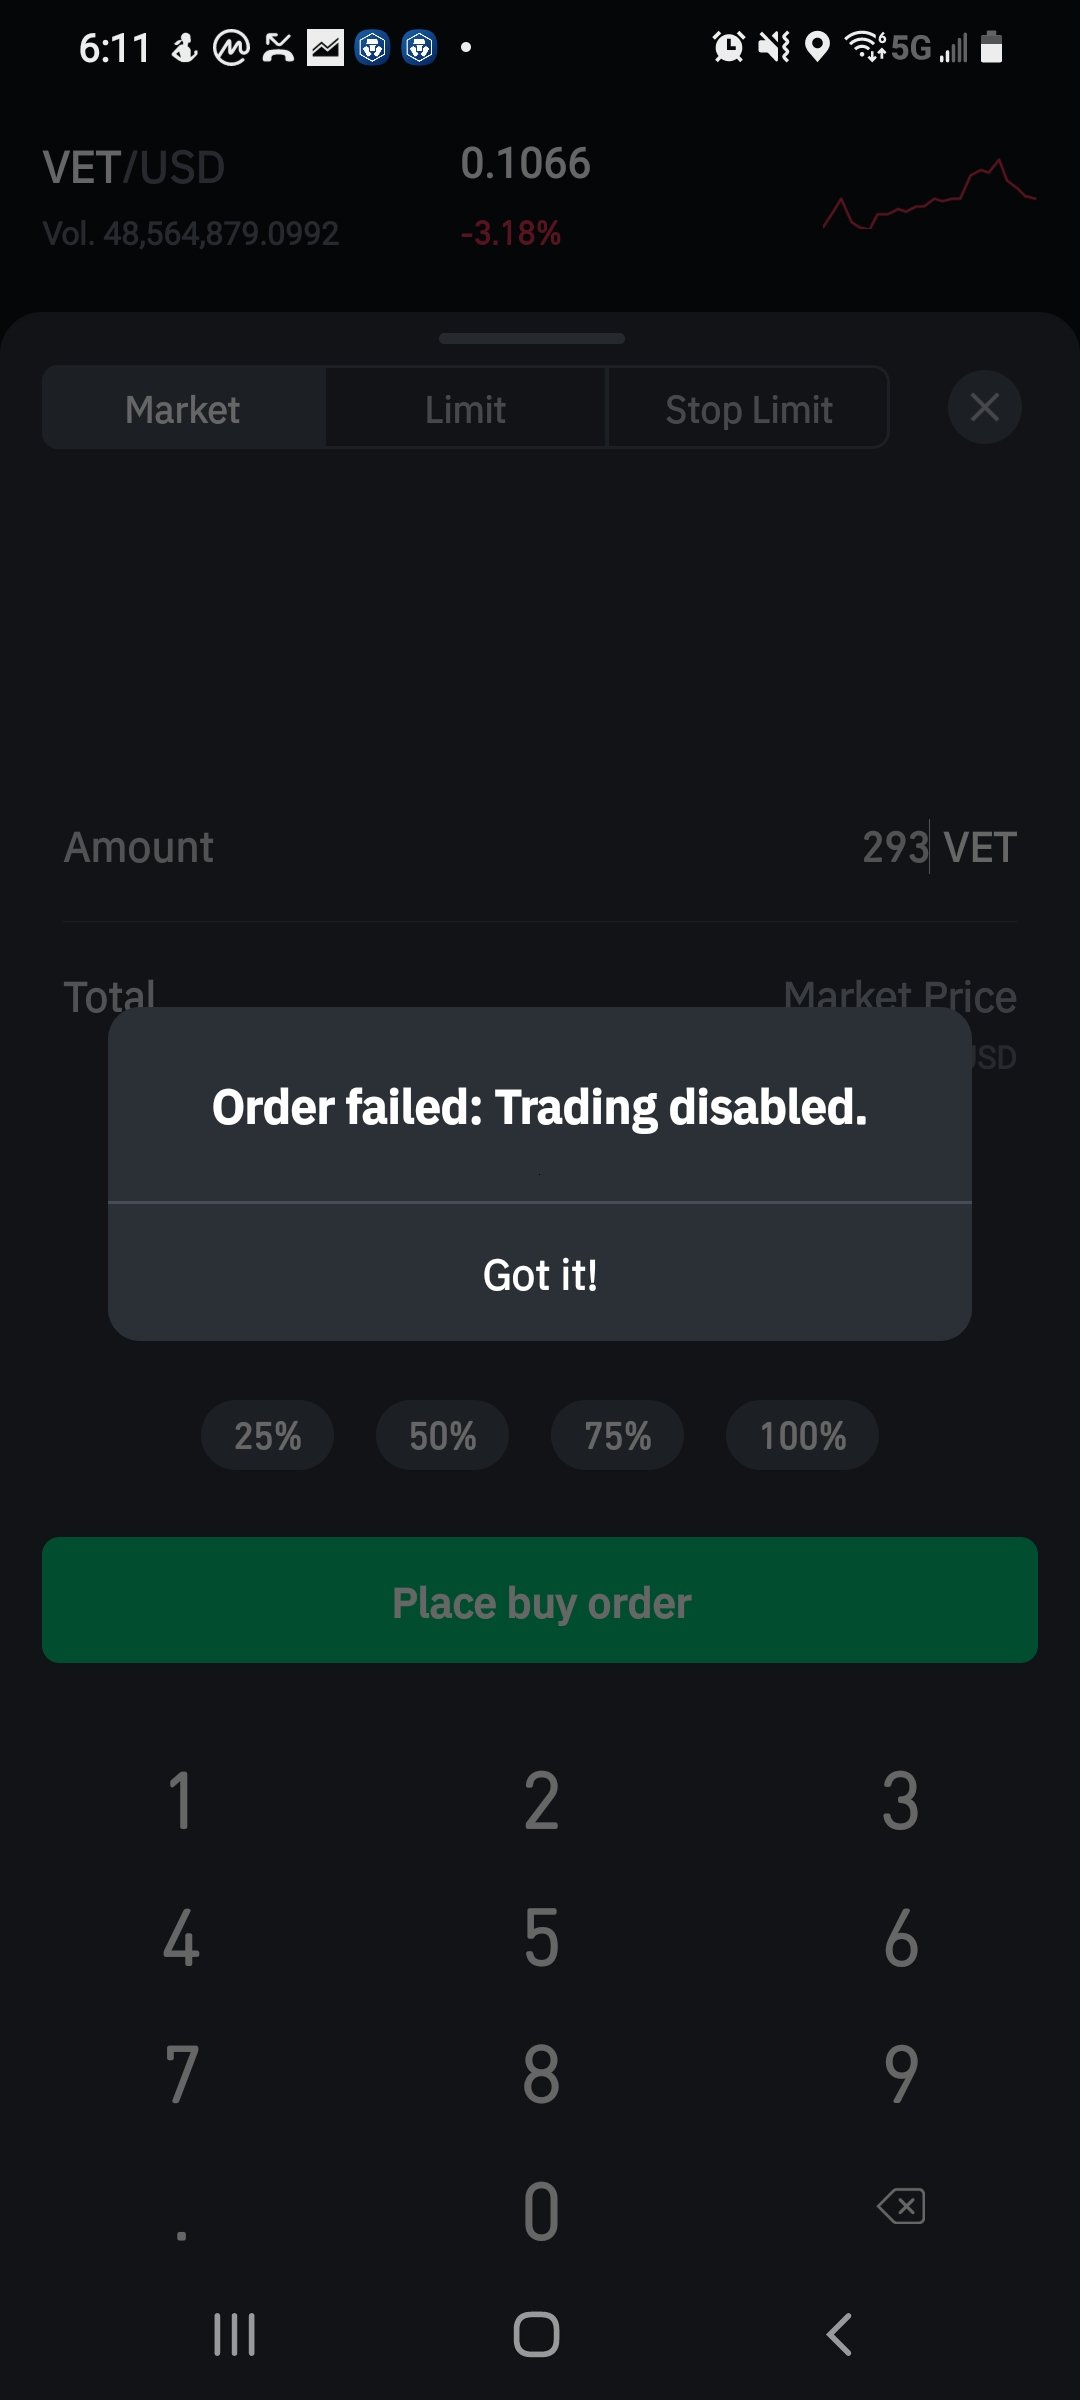 Binance complaint Stole 700 dollars from me